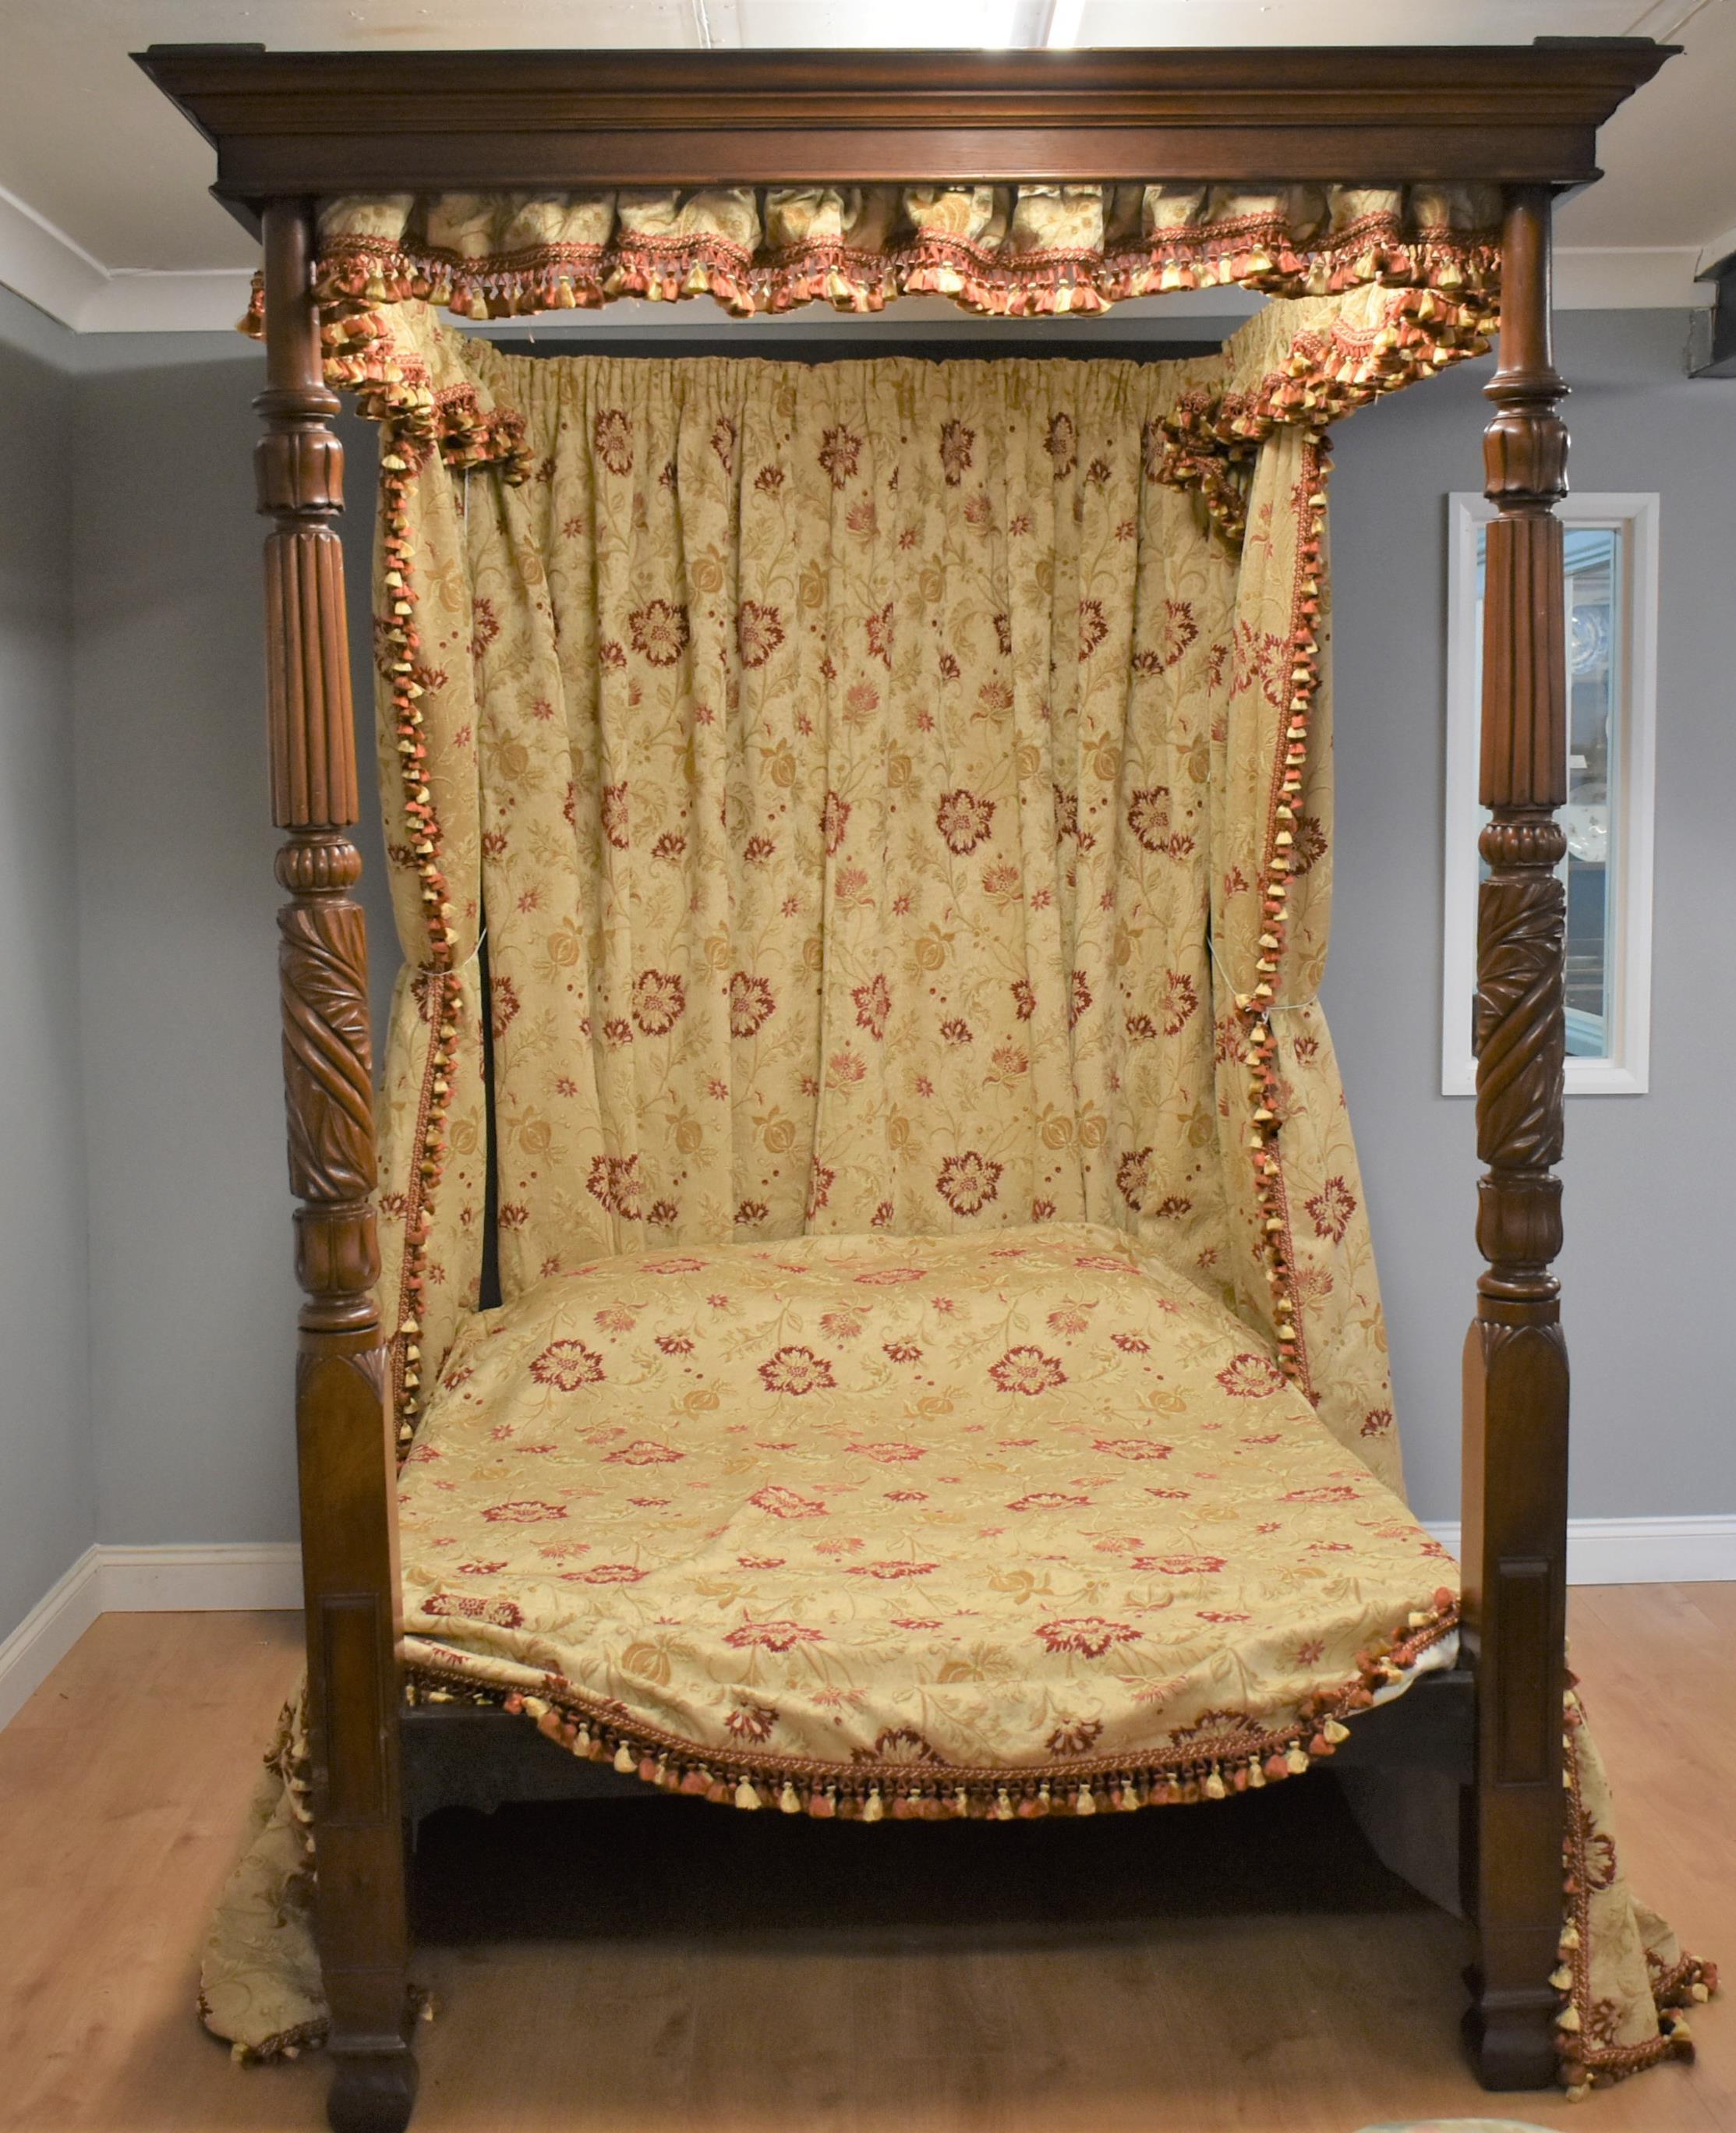 For sale is a good quality George IV mahogany four poster bed, having a stepped canopy, on turned and reeded supports, complete with a fine silk brocade drapery. The bed is in very good condition, with minor wear commensurate with age and